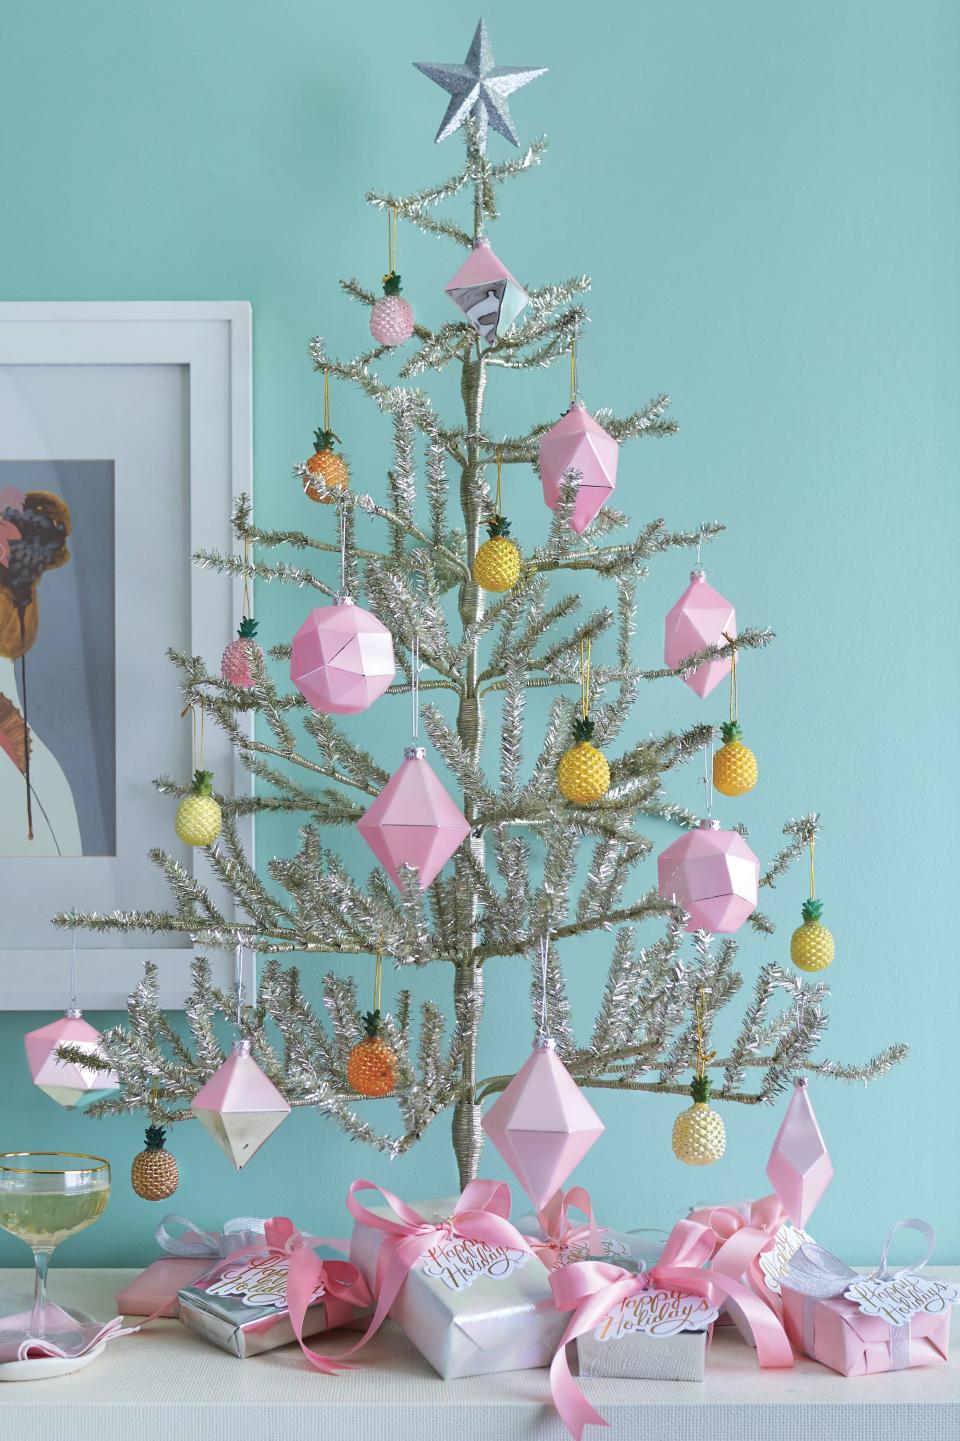 <p>If you're not afraid of a little sparkle, go for a super fun tinsel tree and some shiny pink and silver ornaments. Throw in a few mini pineapples for an extra splash of joy.</p> <p><strong>Get the Look</strong><br> For a similar look, try Glitter Star Tree Topper, $17; <a href="http://www.anrdoezrs.net/links/7885610/type/dlg/sid/SL%2CRX_1812_ChristmasTreeGlitzyMetallicTree%2Crellis1271%2CCHR%2CIMA%2C560699%2C201811%2CI/https://www.wayfair.com/holiday-decor/pdp/queens-of-christmas-glitter-star-tree-topper-winl1794.html?piid=12387885" rel="nofollow noopener" target="_blank" data-ylk="slk:wayfair.com" class="link ">wayfair.com</a><br> For a similar look, try Solid Fabric Satin Ribbon, $9; <a href="https://ribbons.com/fabric-satin-ribbon/id=106503" rel="nofollow noopener" target="_blank" data-ylk="slk:ribbons.com" class="link ">ribbons.com</a><br> Happy Holidays Tags, $10/set of 8; <a href="http://www.anrdoezrs.net/links/7885610/type/dlg/sid/SL%2CRX_1812_ChristmasTreeGlitzyMetallicTree%2Crellis1271%2CCHR%2CIMA%2C560699%2C201811%2CI/http://www.papersource.com/gift-wrap/happy-holidays-die-cut-tags-10005381.html" rel="nofollow noopener" target="_blank" data-ylk="slk:papersource.com" class="link ">papersource.com</a><br> For a similar look, try 3' Tinsel Twig Tree, $40; <a href="https://www.christmascentral.com/3-shiny-silver-tinsel-artificial-christmas-twig-tree-unlit-32620422/" rel="nofollow noopener" target="_blank" data-ylk="slk:christmascentral.com" class="link ">christmascentral.com</a><br> Silver Glitter Wrapping Paper, $10; <a href="http://www.anrdoezrs.net/links/7885610/type/dlg/sid/SL%2CRX_1812_ChristmasTreeGlitzyMetallicTree%2Crellis1271%2CCHR%2CIMA%2C560699%2C201811%2CI/https://www.papersource.com/gift-wrap/silver-glitter-wrapping-paper-42055503.html" rel="nofollow noopener" target="_blank" data-ylk="slk:papersource.com" class="link ">papersource.com</a><br> Cody Foster & Co. Tiny Pineapple Ornaments; <a href="http://codyfoster.com/" rel="nofollow noopener" target="_blank" data-ylk="slk:codyfoster.com" class="link ">codyfoster.com</a> for retailers<br> Cody Foster & Co. Geometric Ornaments; <a href="http://codyfoster.com/" rel="nofollow noopener" target="_blank" data-ylk="slk:codyfoster.com" class="link ">codyfoster.com</a> for retailers</p>